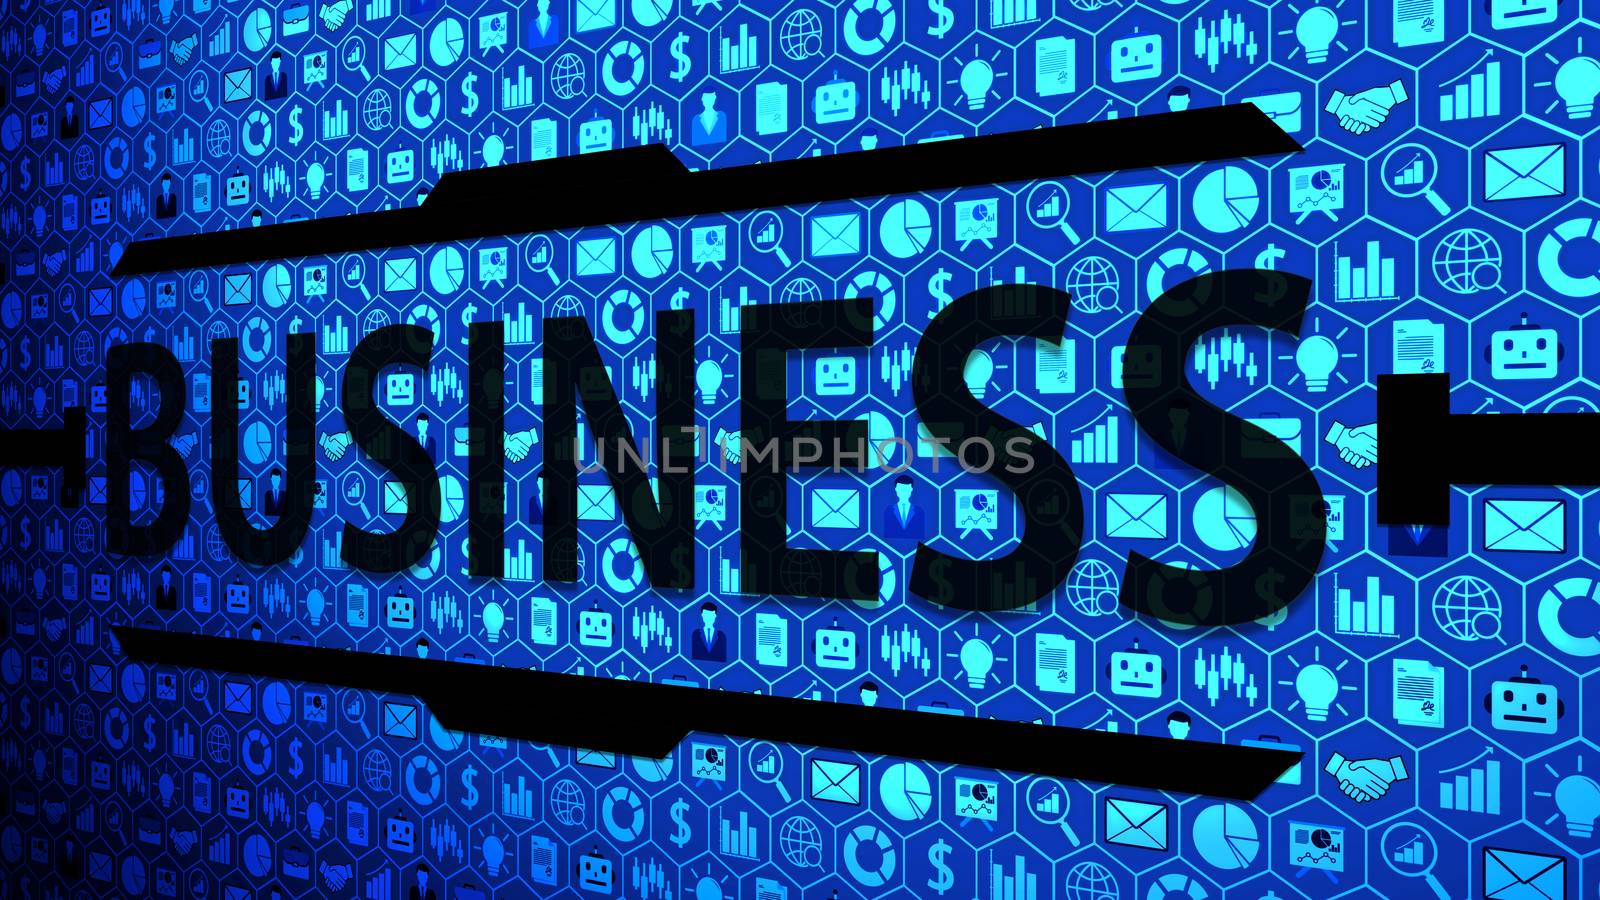 8K Business and Technology Big Picture Background Composed of Icons Set with Blue Light ver.3 by ariya23156